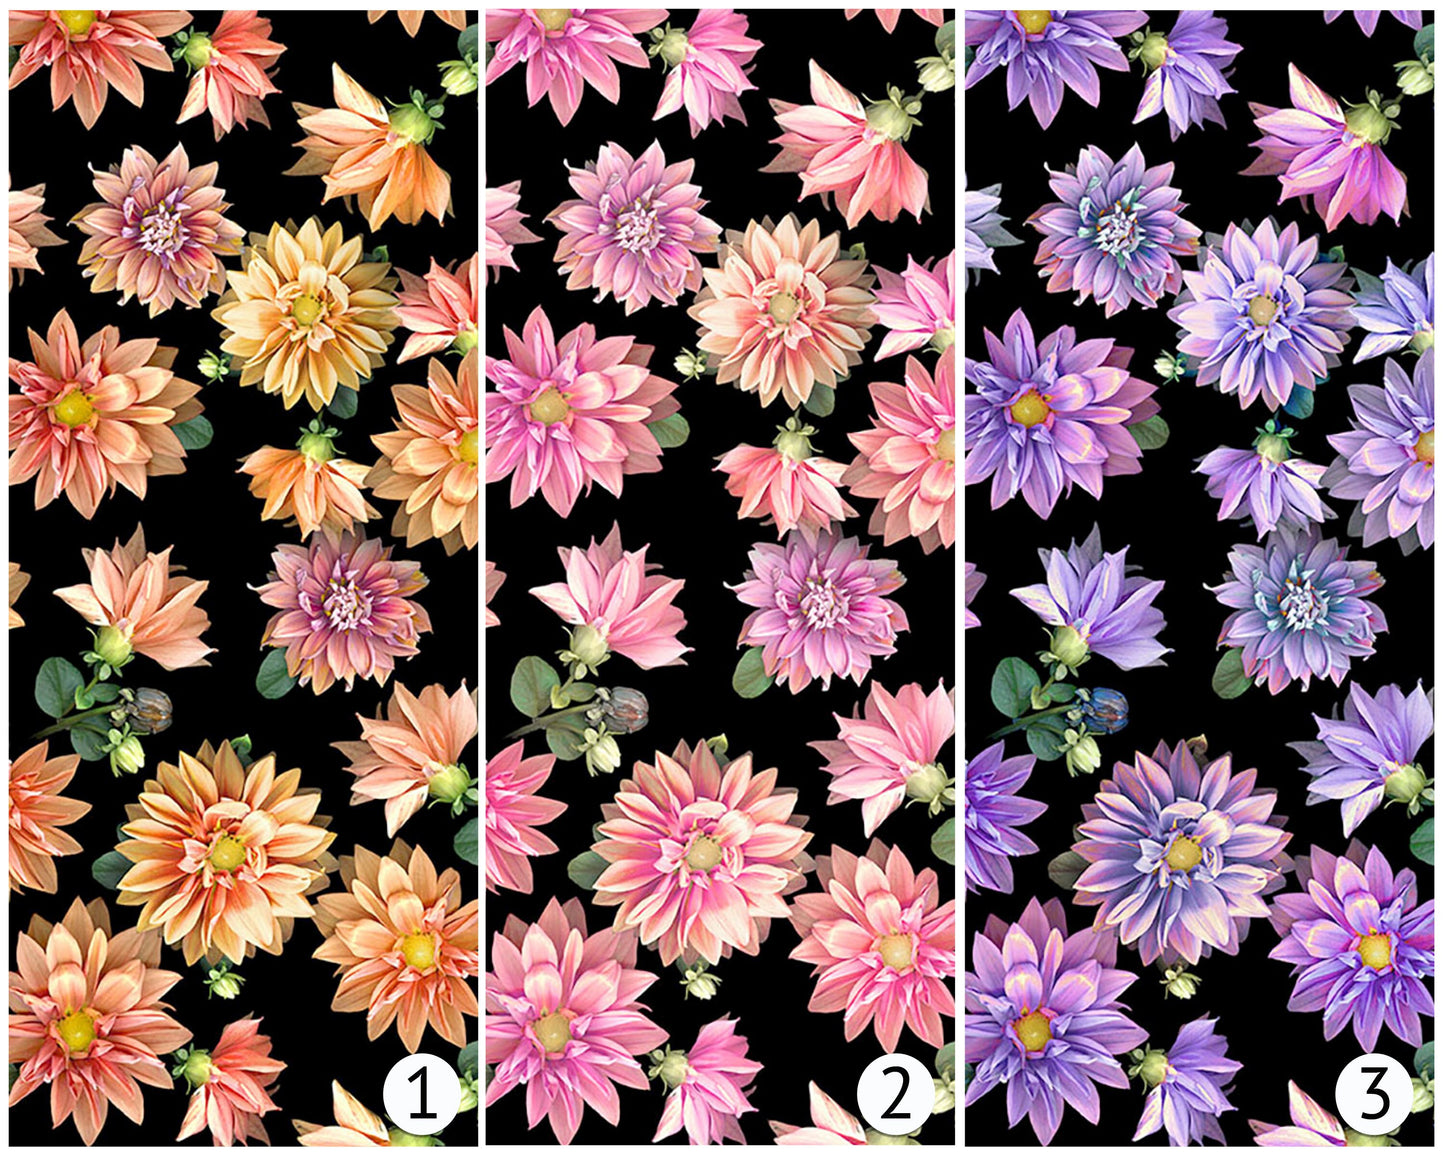 Dahlia Floral Fabric - 100% Cotton - Tina's Garden Collection for Clothworks - digital flower fabric quilting material - Ships NEXT DAY